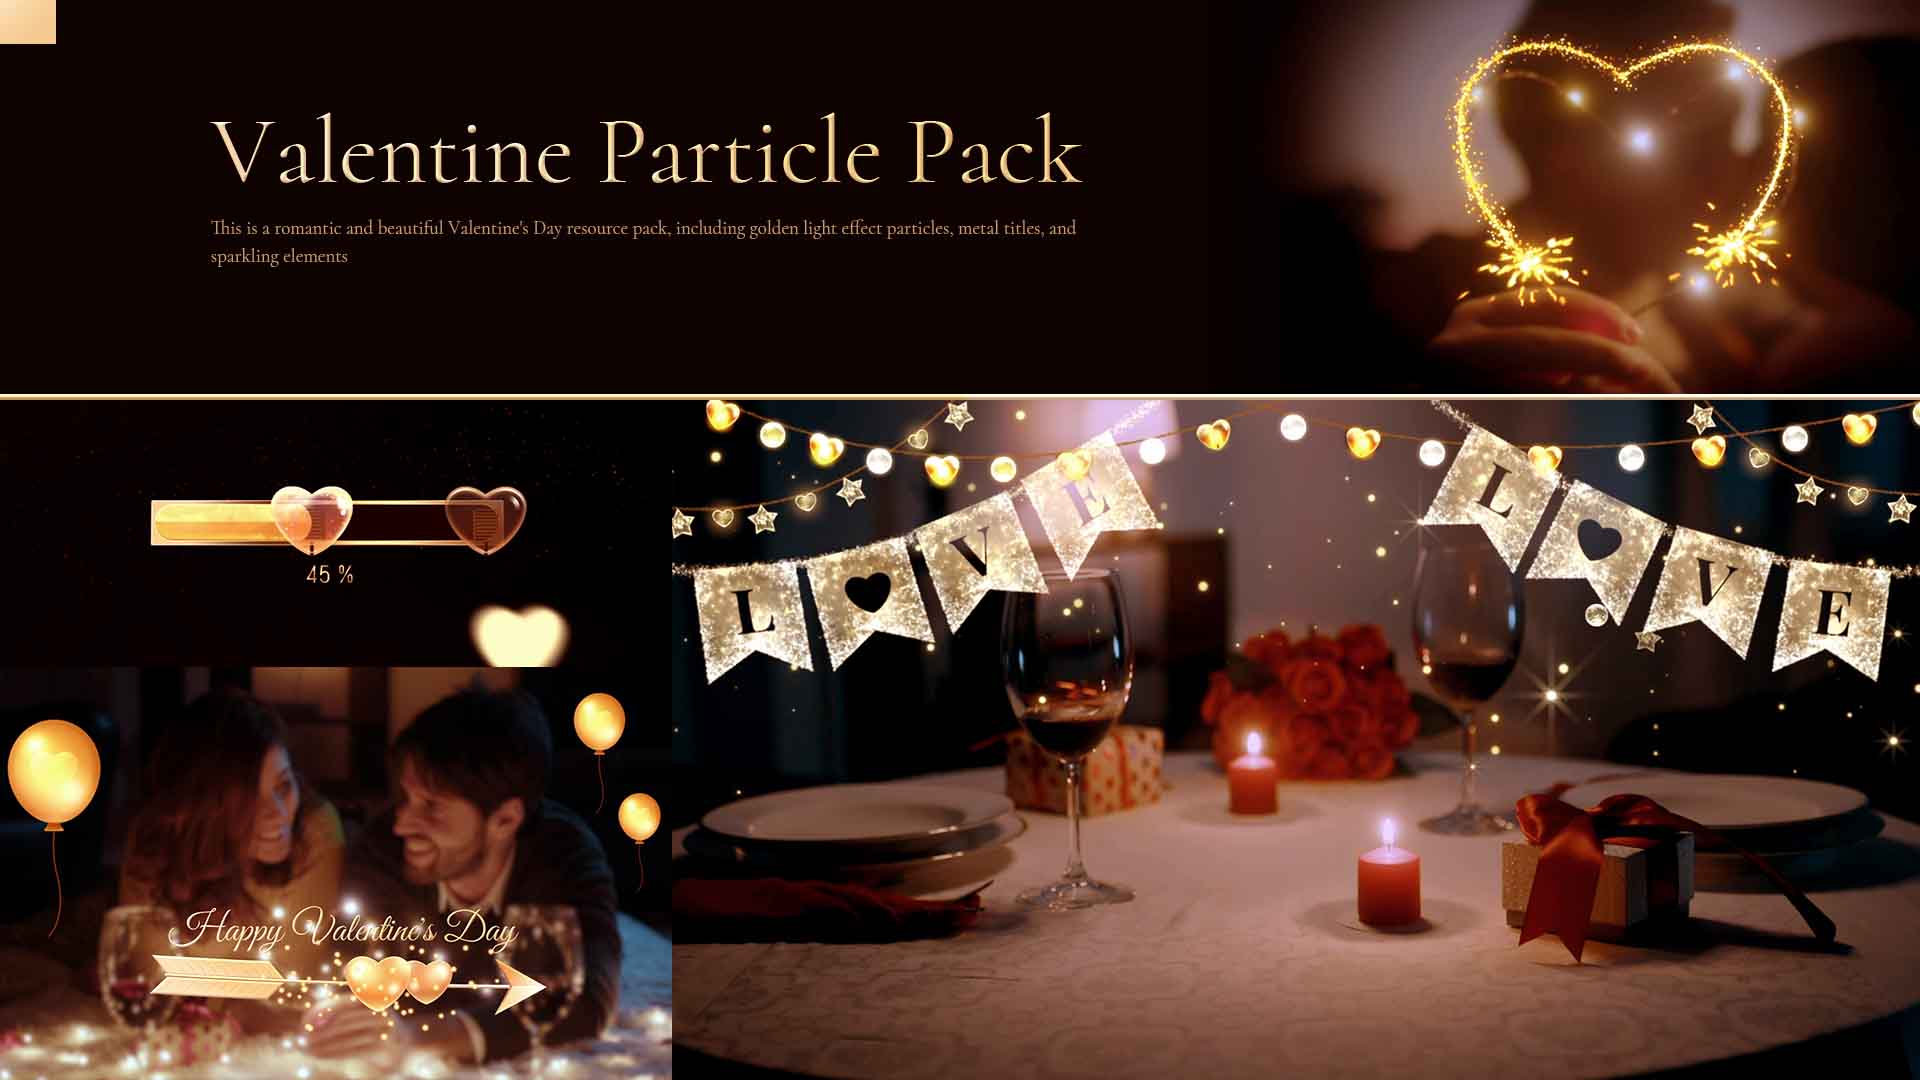 Valentine Particle Pack